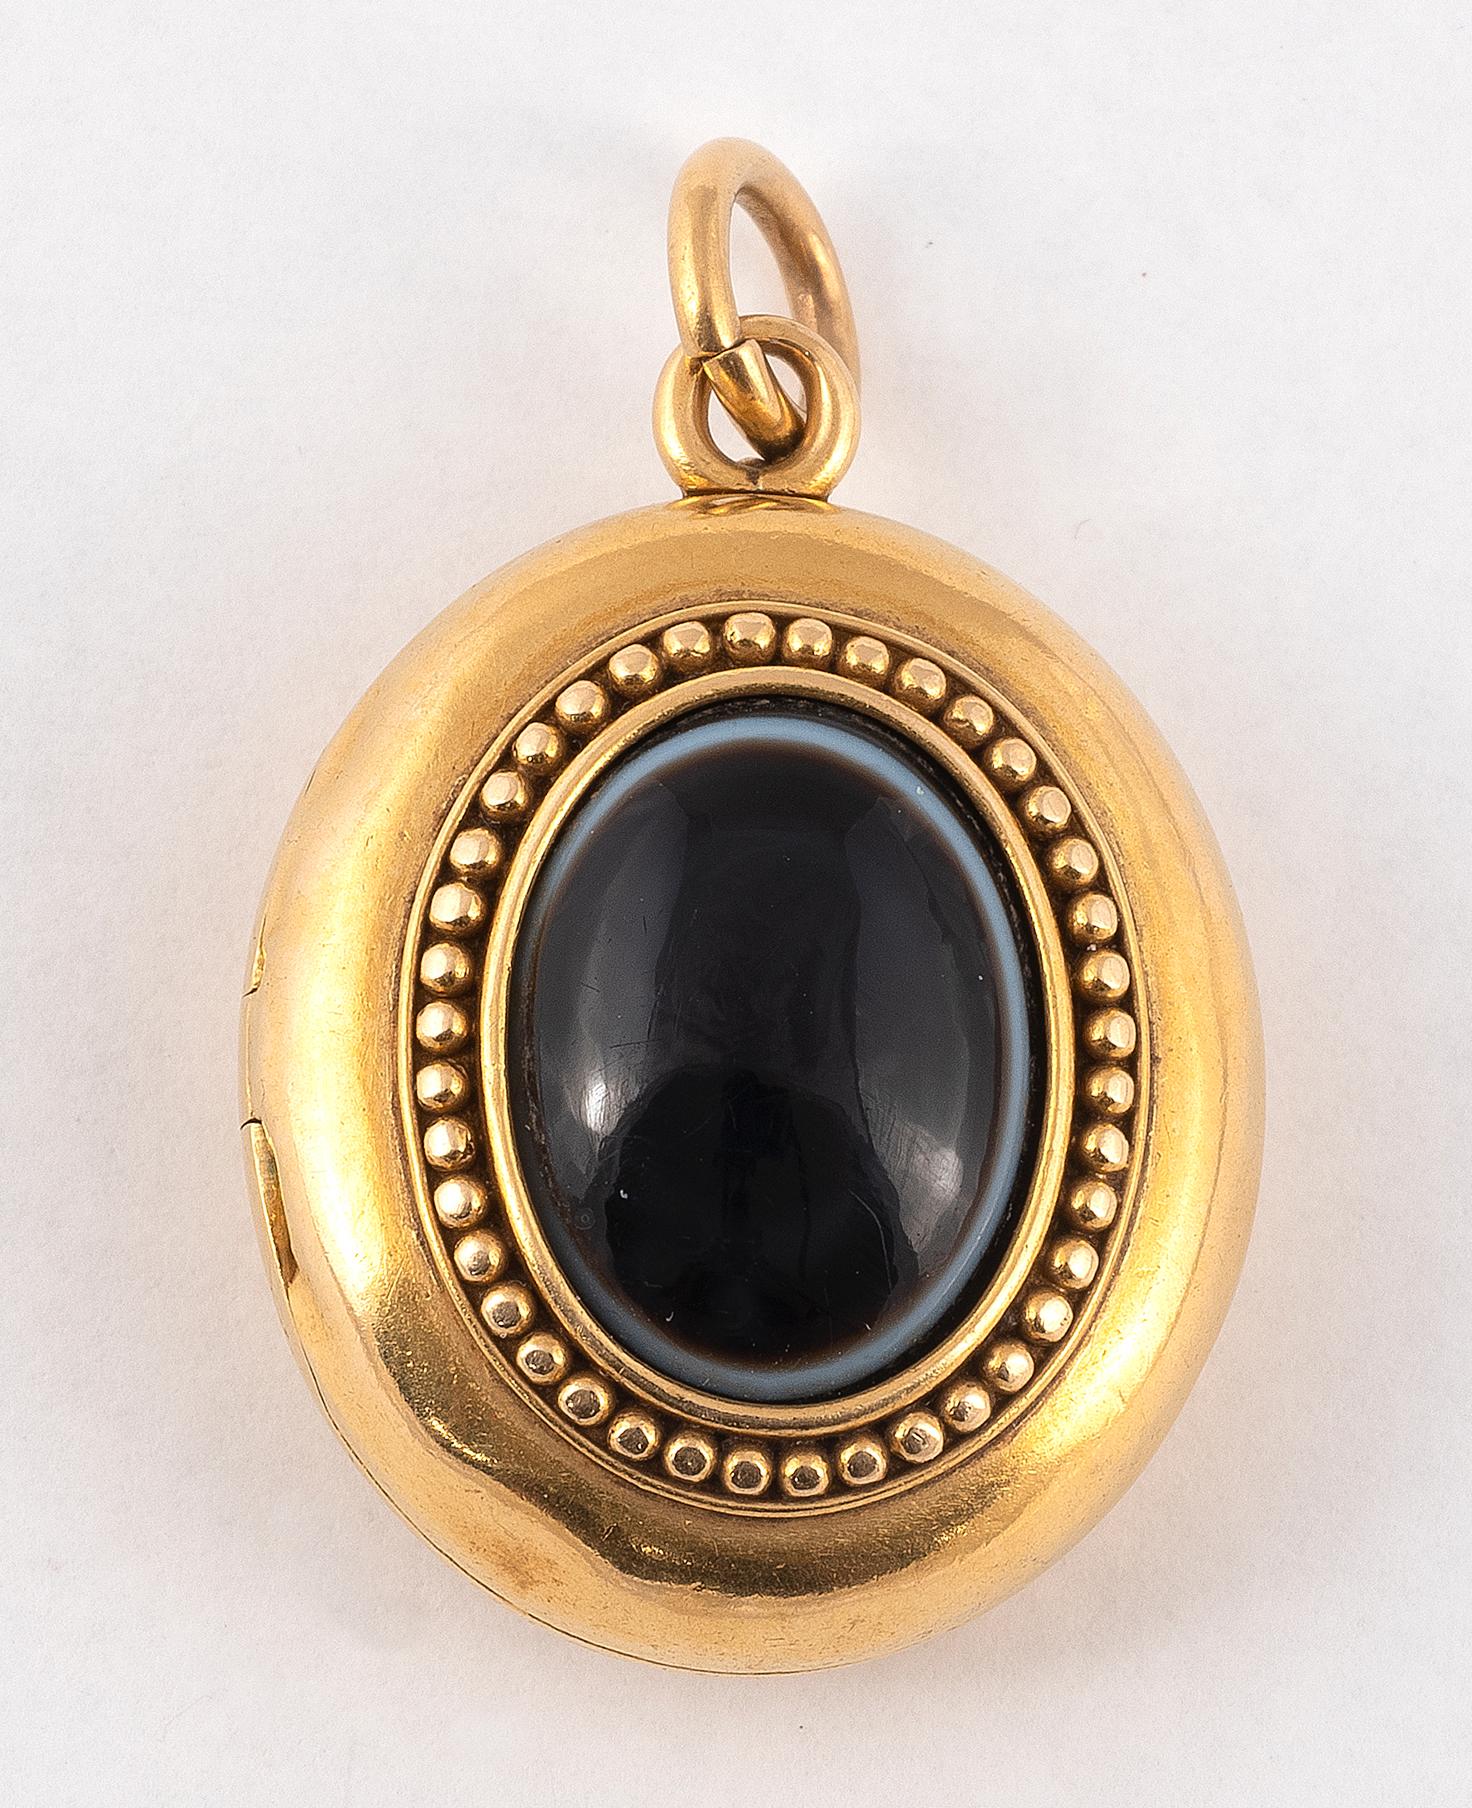 Cabochon Mid-19th Century Agate and Gold Locket Pendant